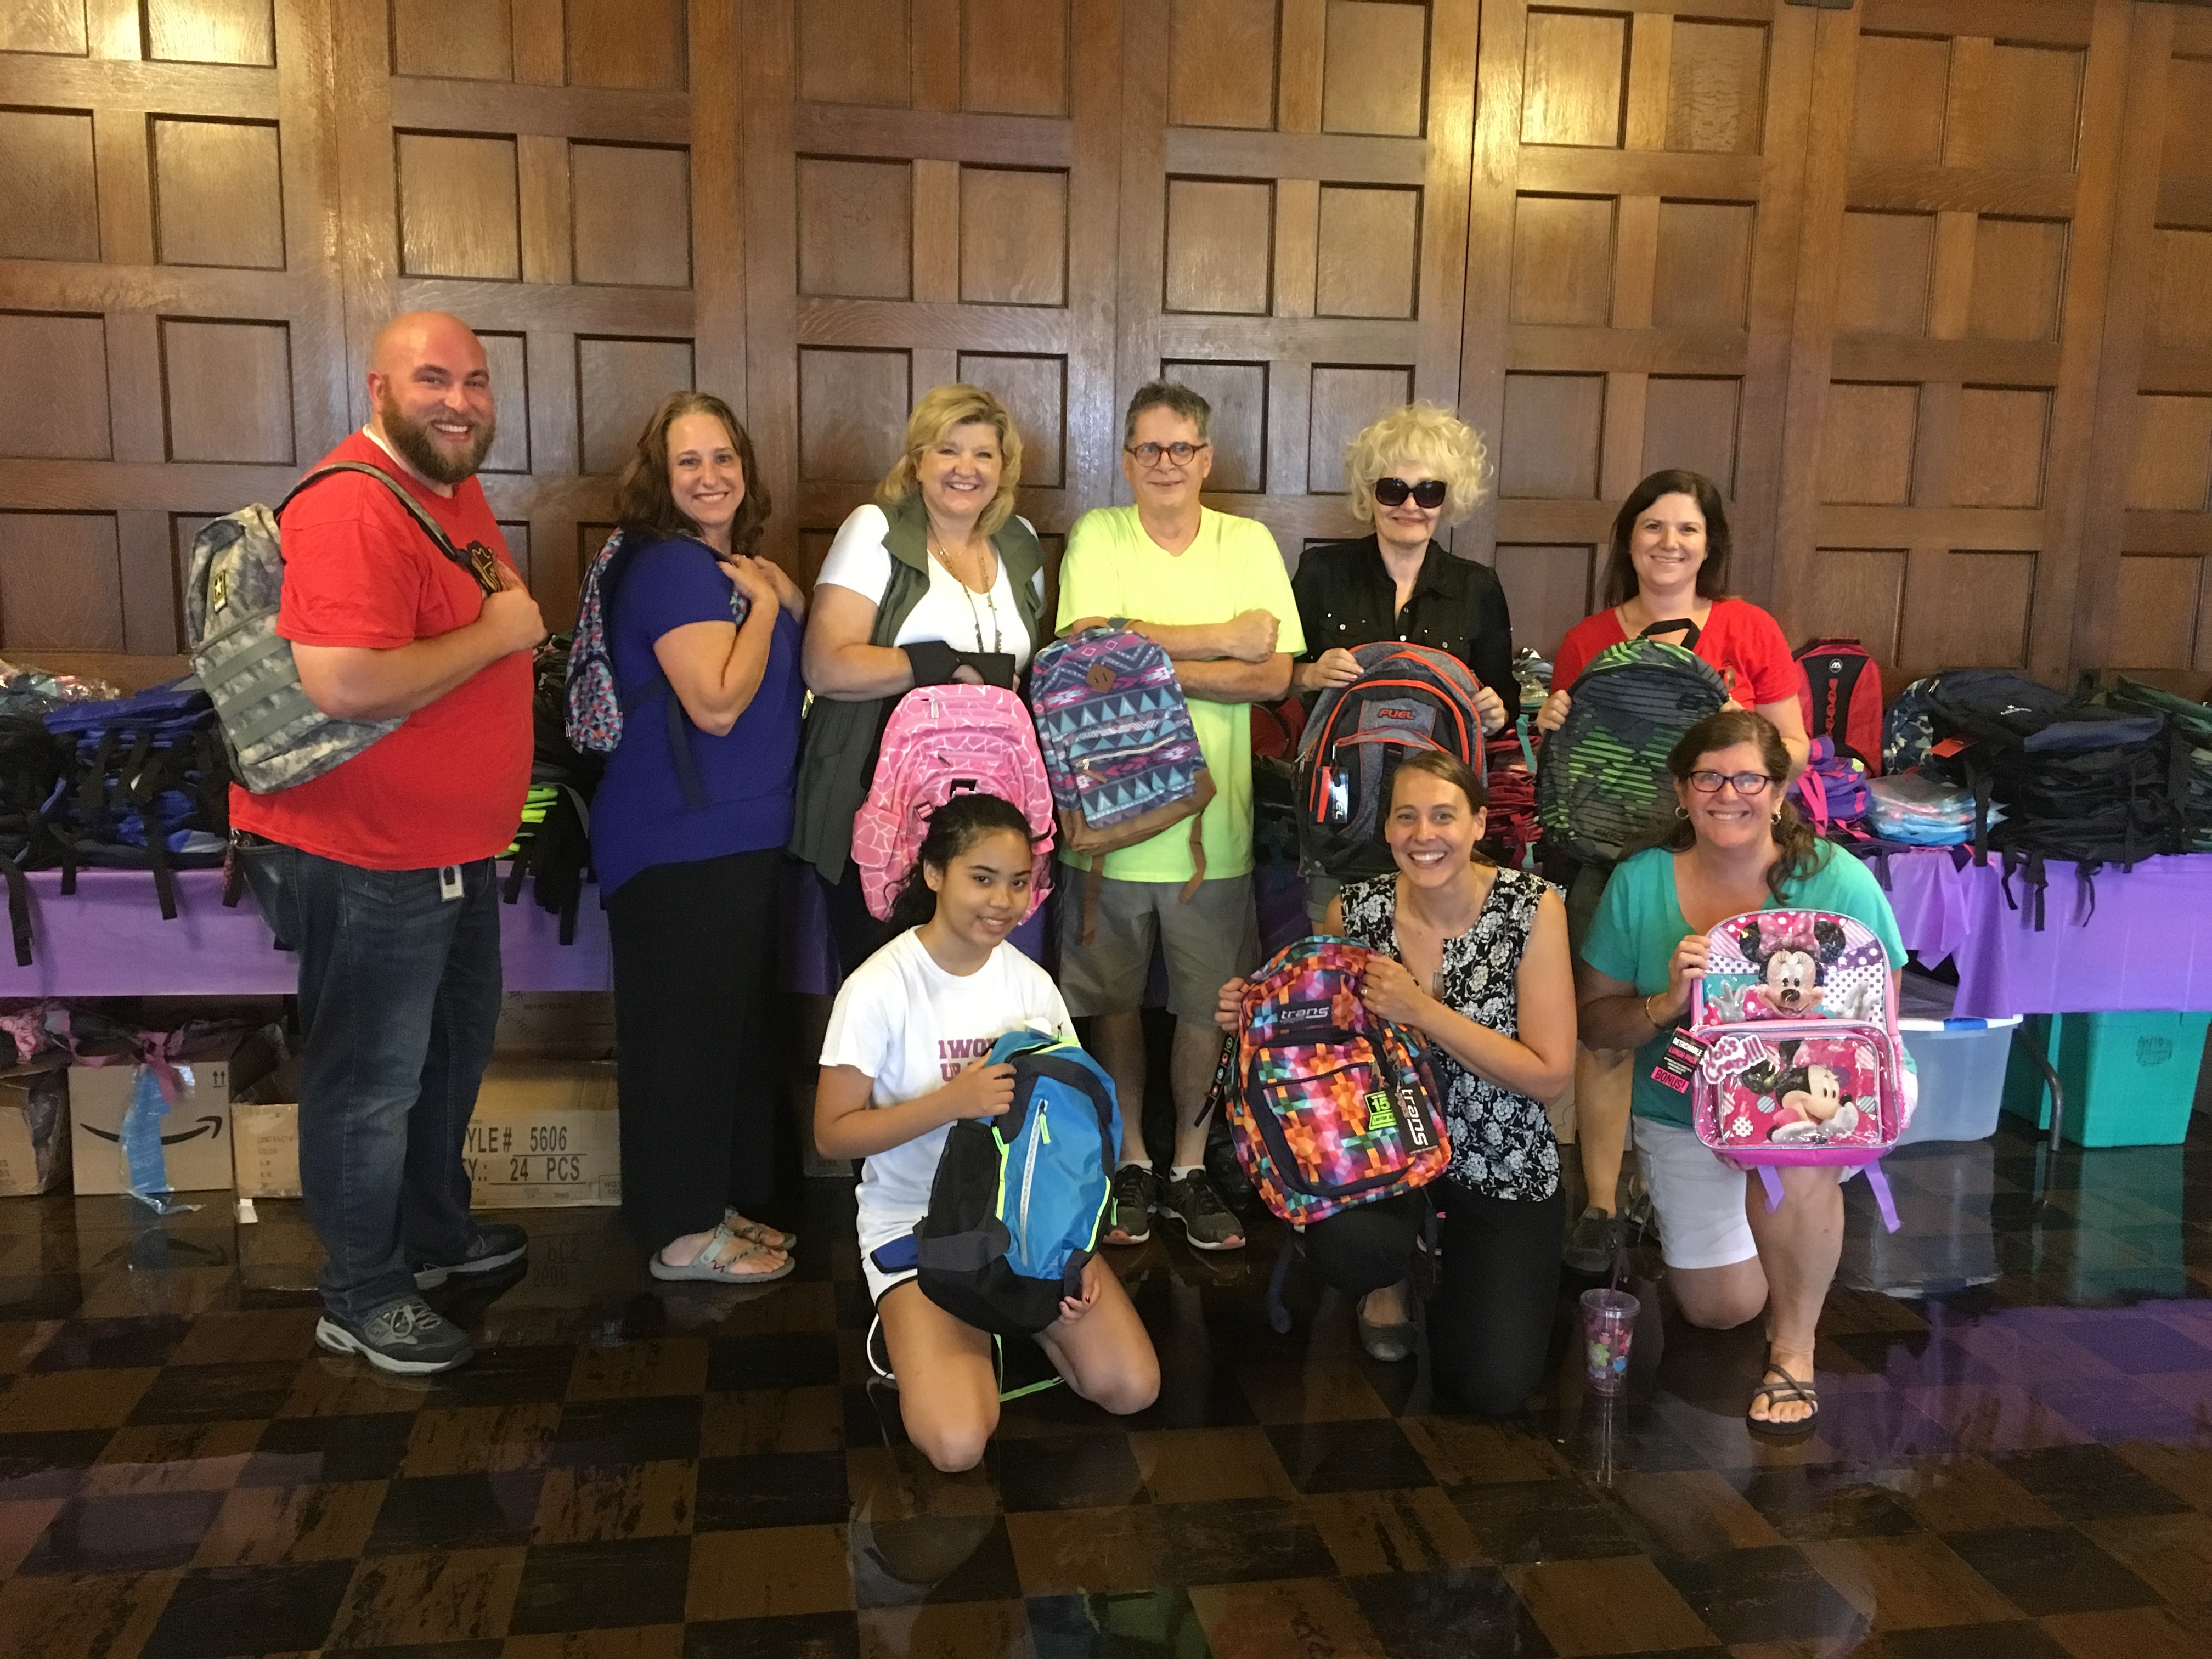 Back to School Shopping Day for Foster Care, August 9